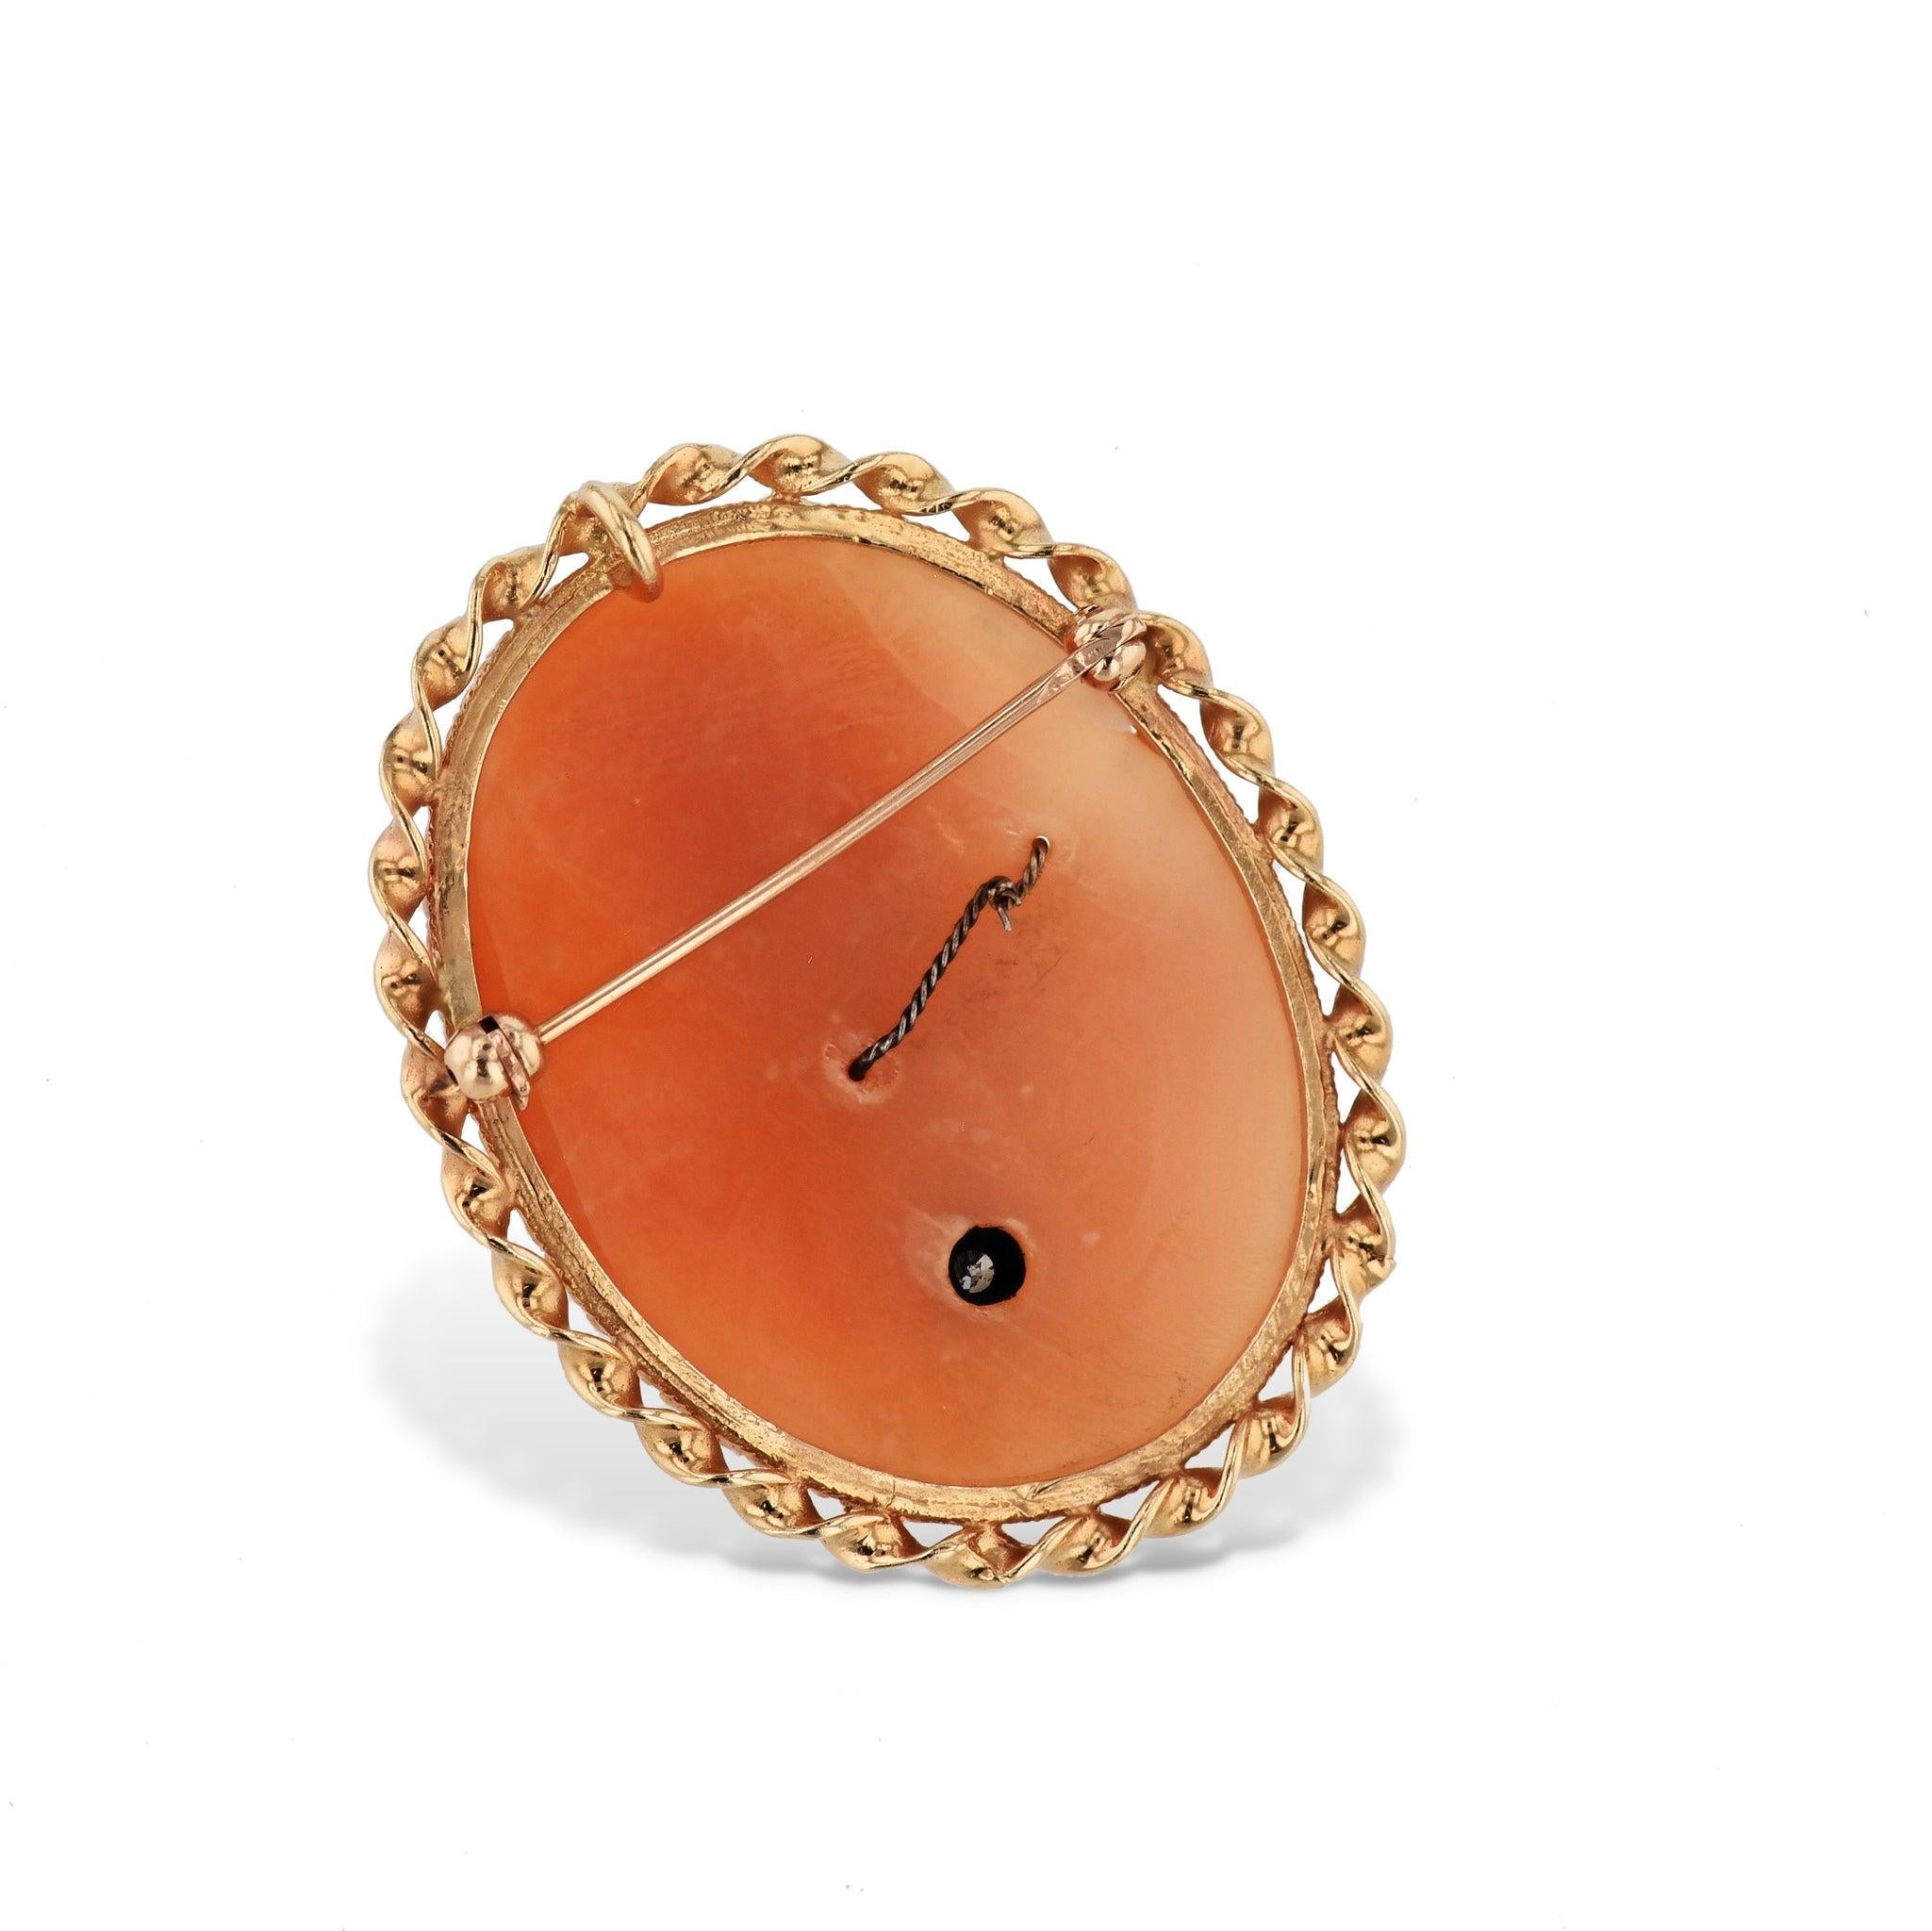 Capture the timeless beauty of this natural shell cameo pin, featuring an oval-shaped shell with a captivating profile of a portrait carved into 14kt yellow gold. Accented with one sparkling diamond. This distinctive estate piece from H&H's Estate &